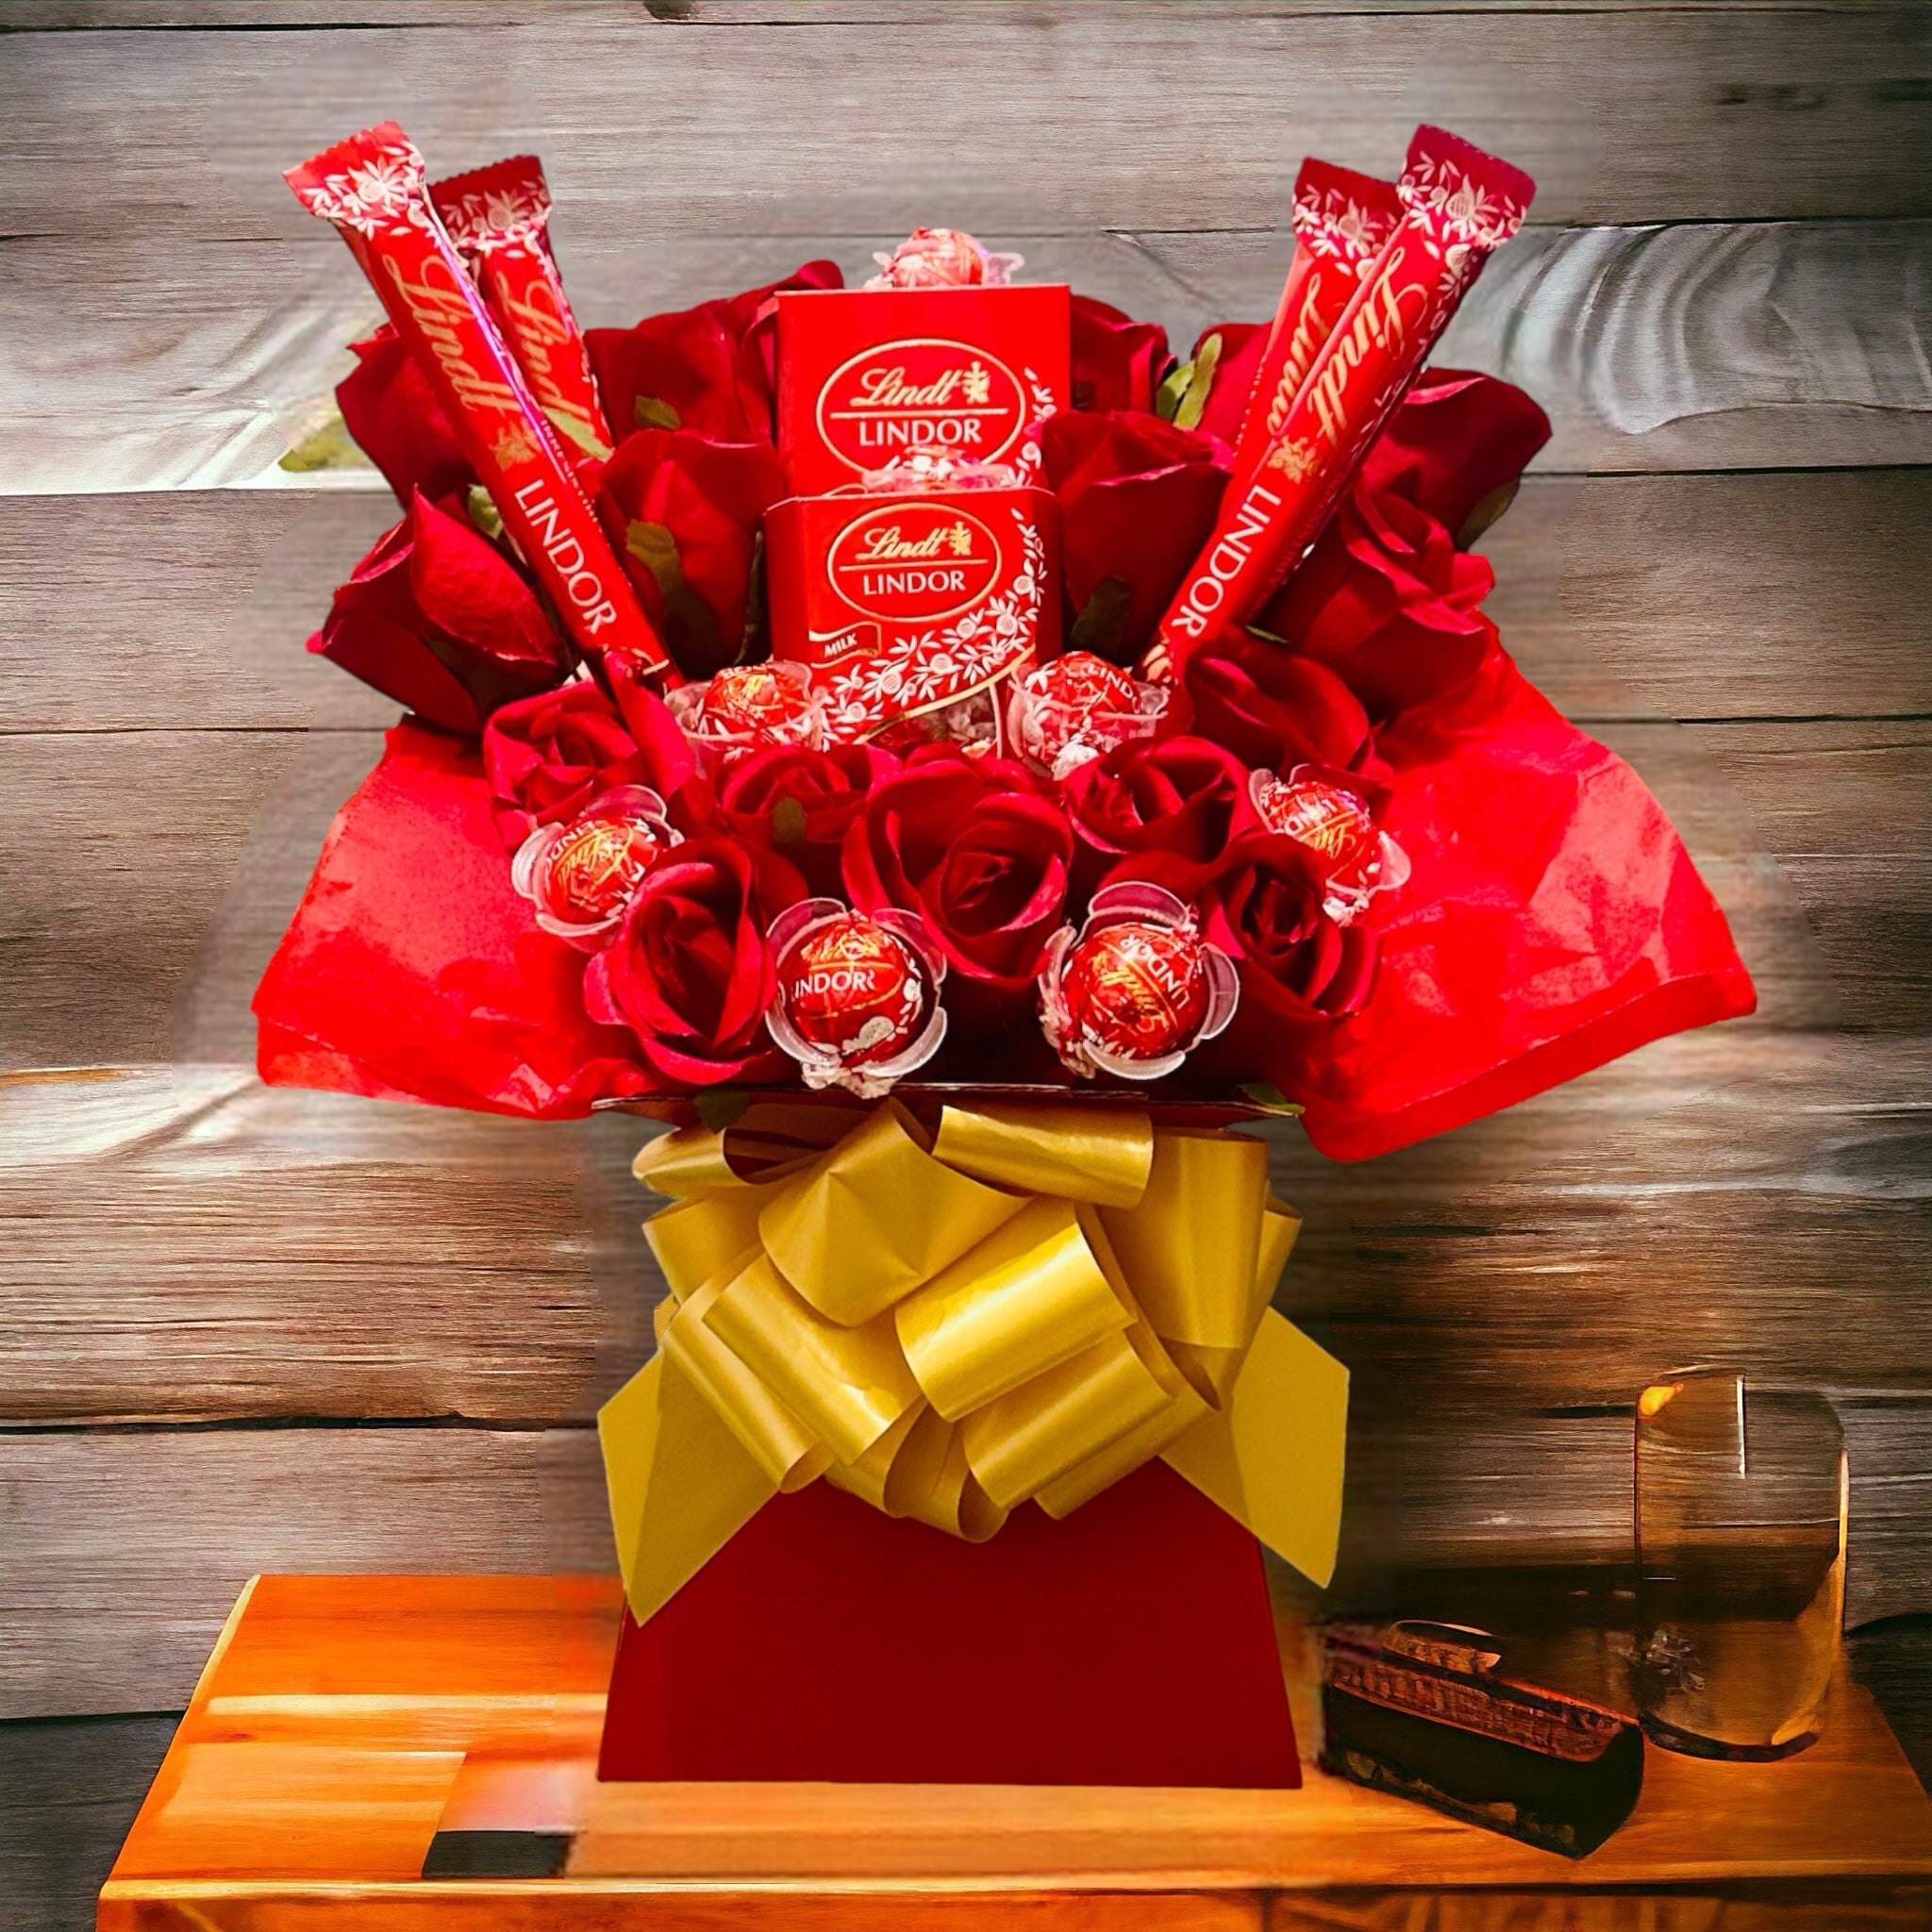 Lindt Chocolate and Flower Bouquet